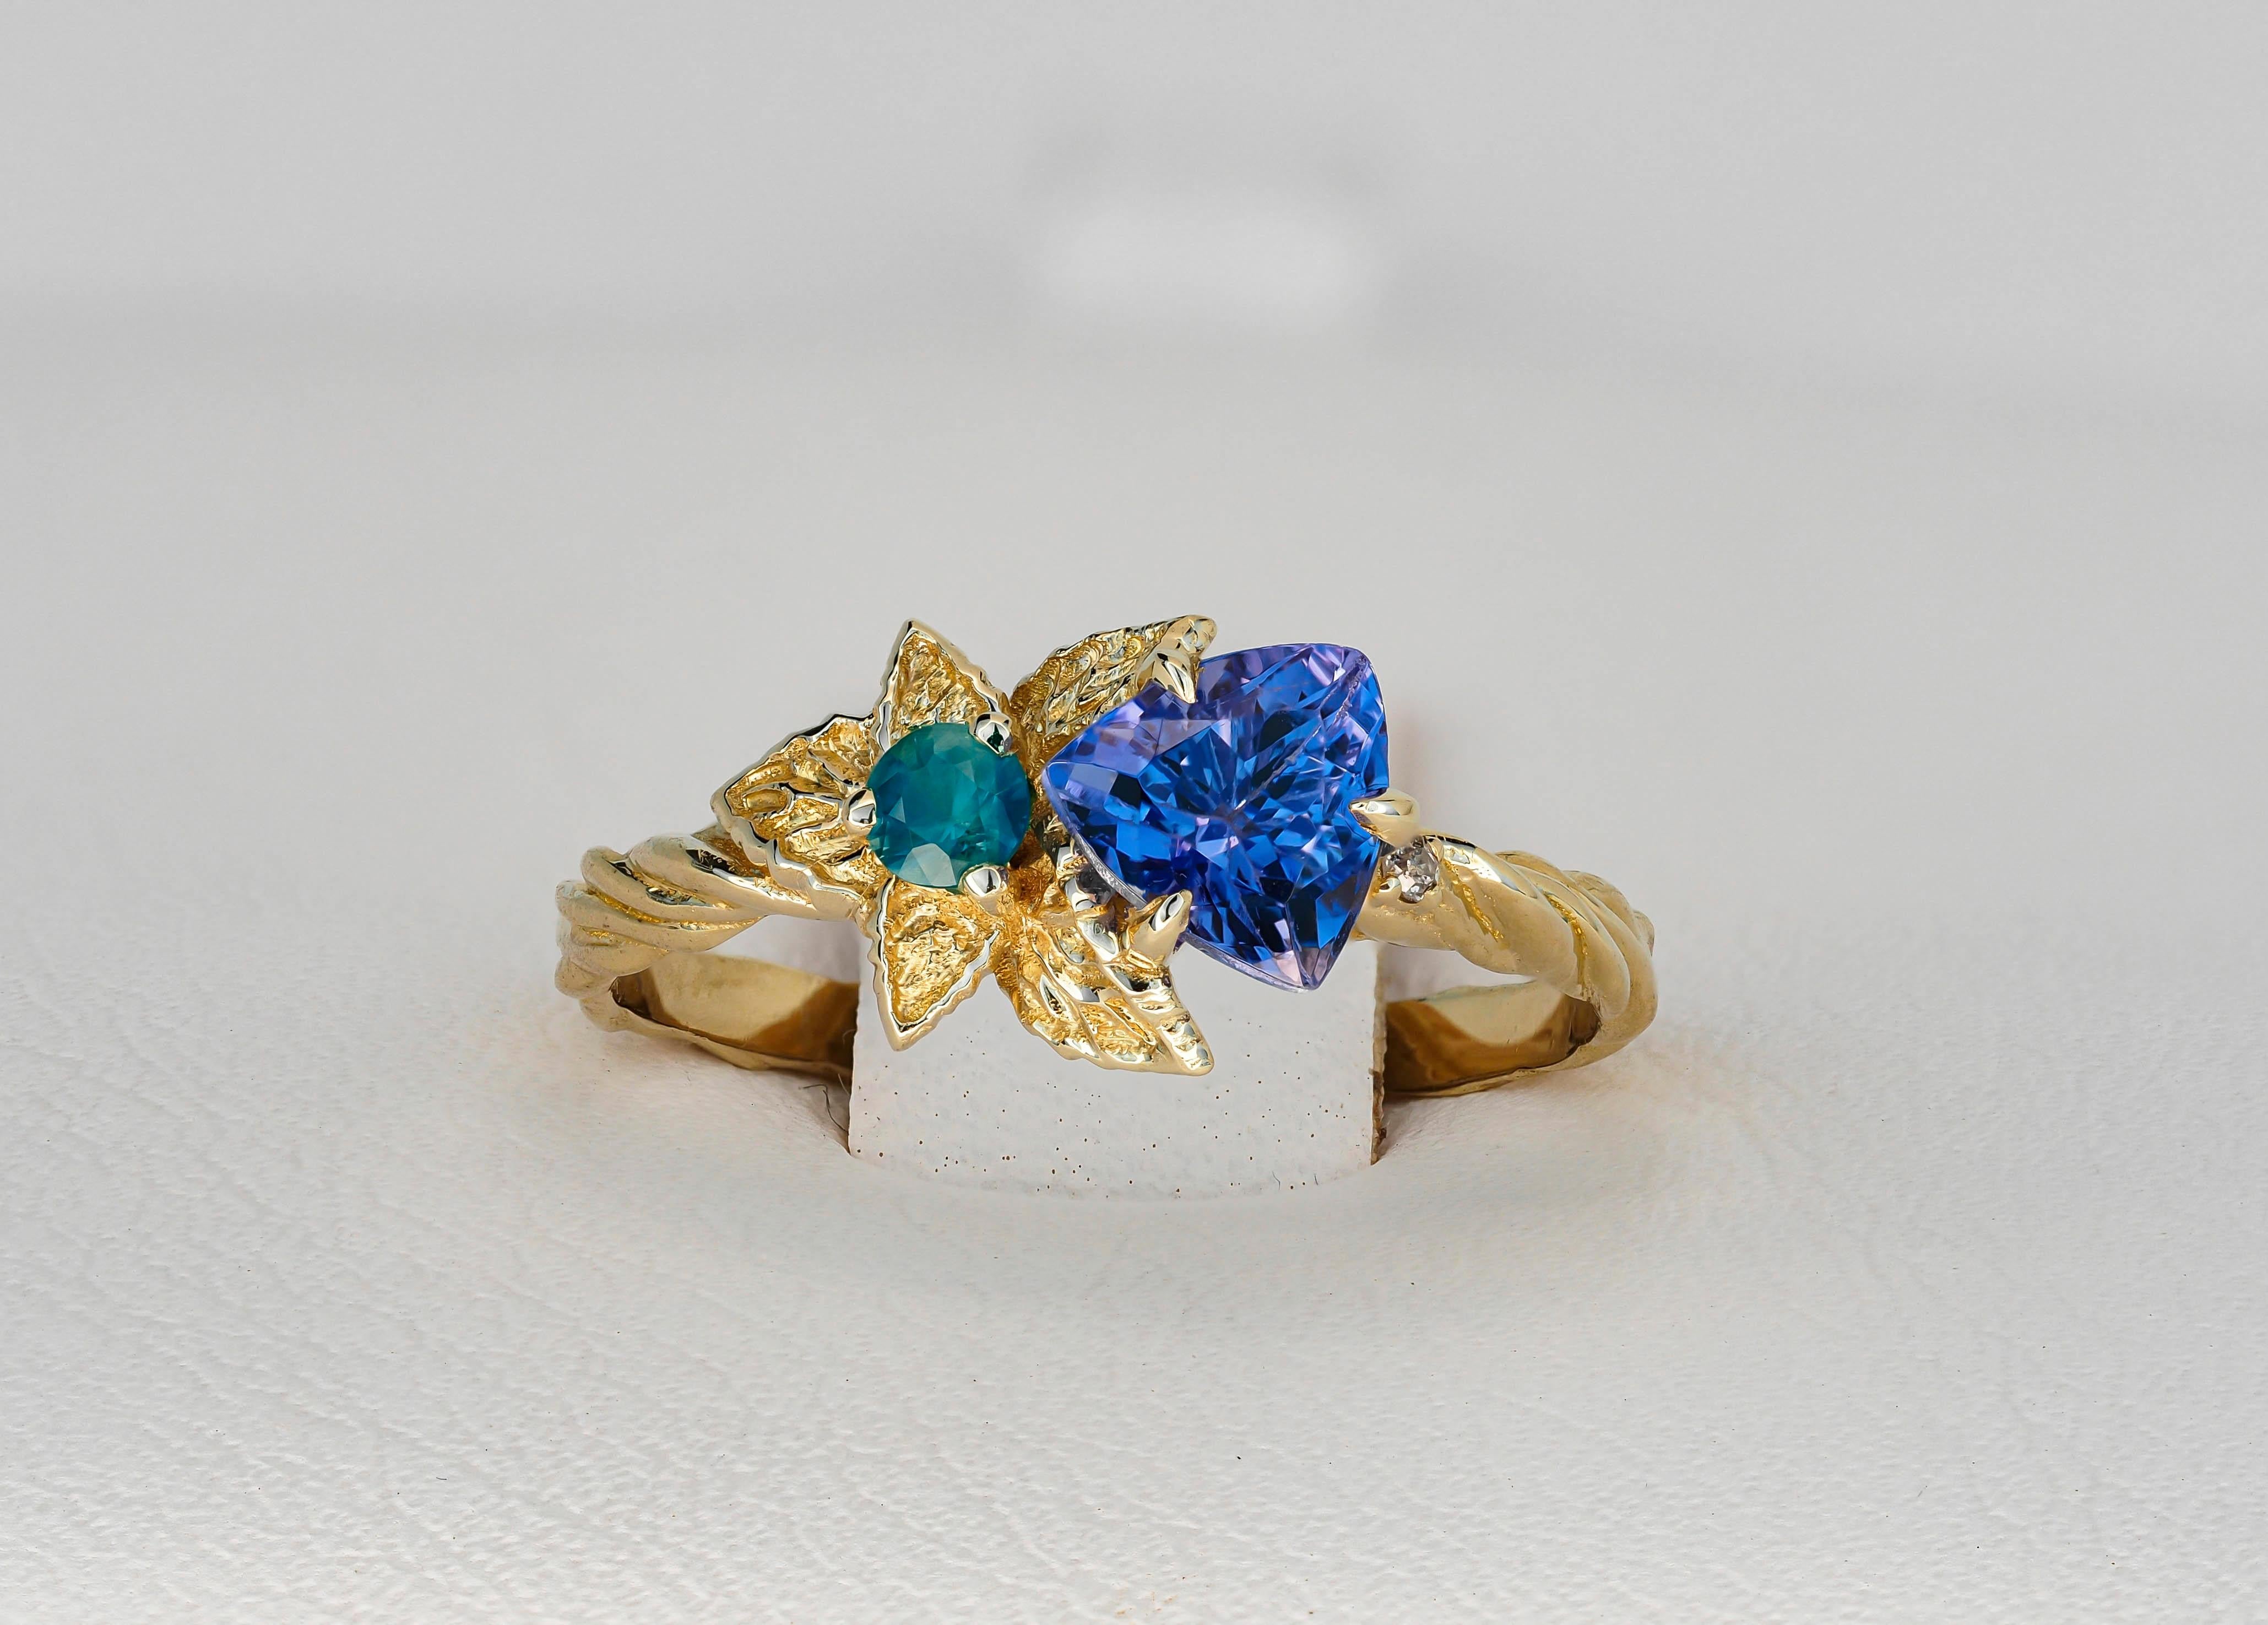 For Sale:  Tanzanite and diamonds 14k gold ring. Flower design ring with tanzanite. 8